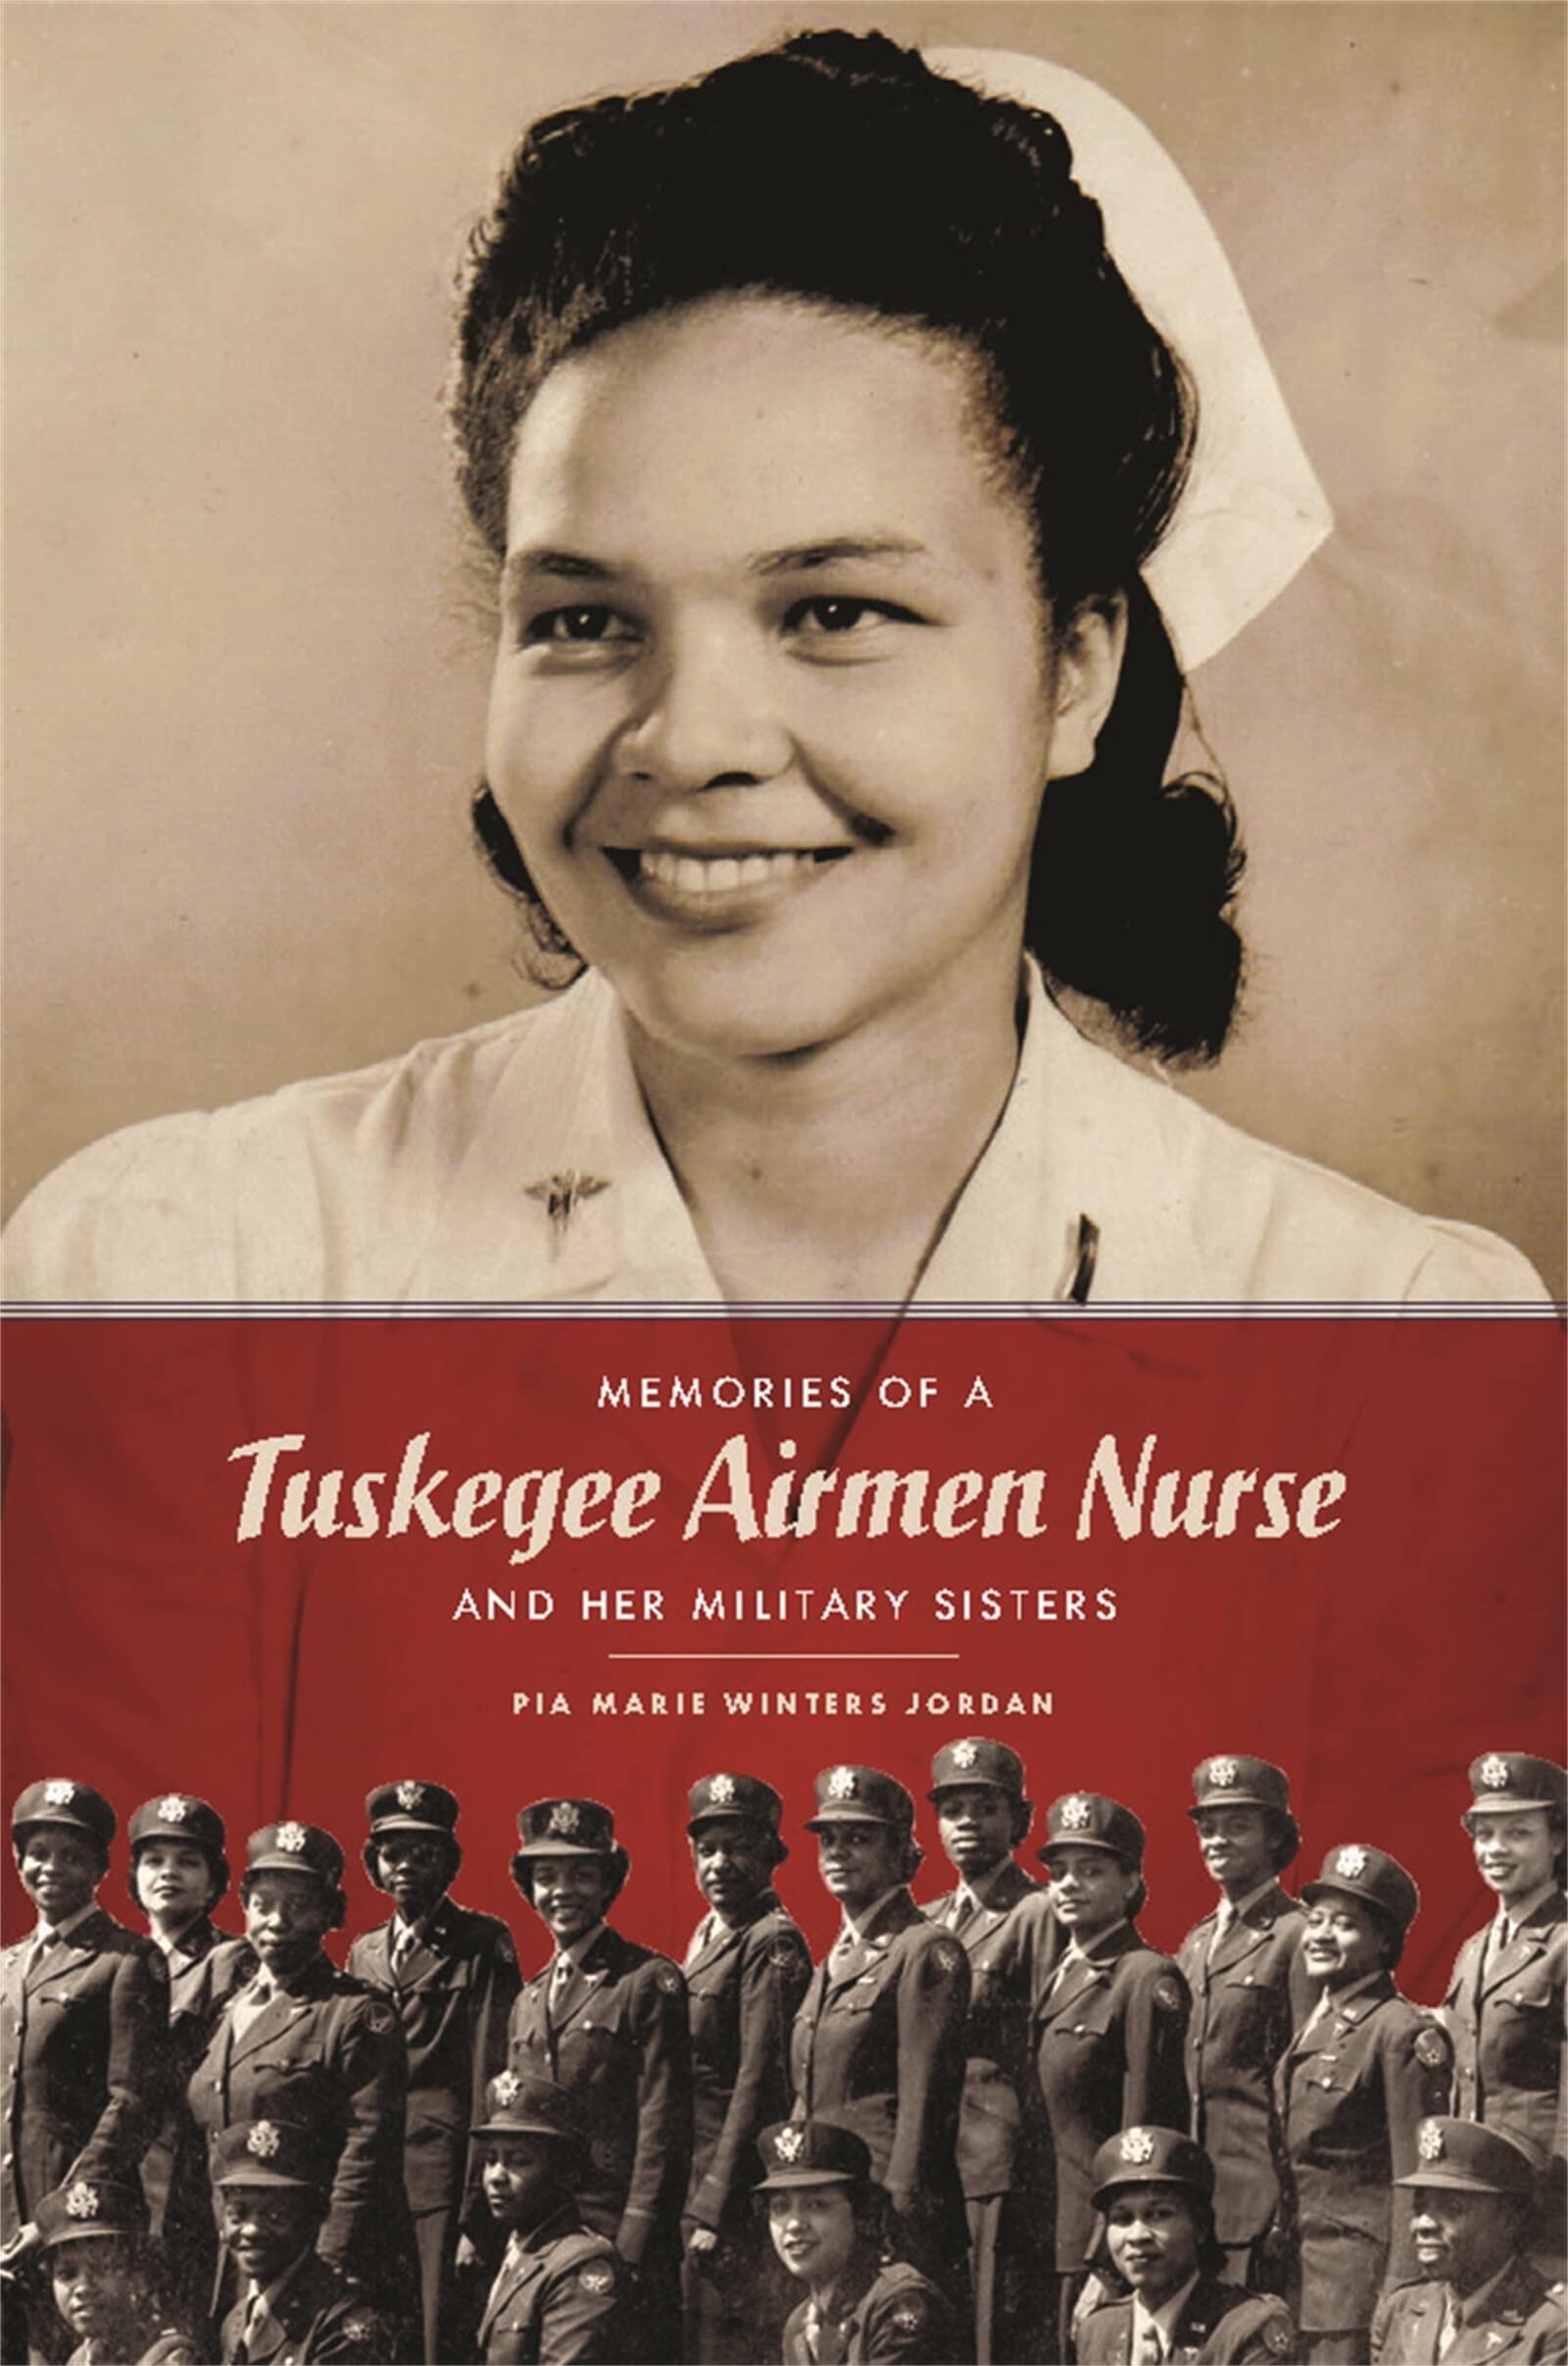 The book cover of “Memories of a Tuskegee Airmen Nurse and Her Military Sisters” 